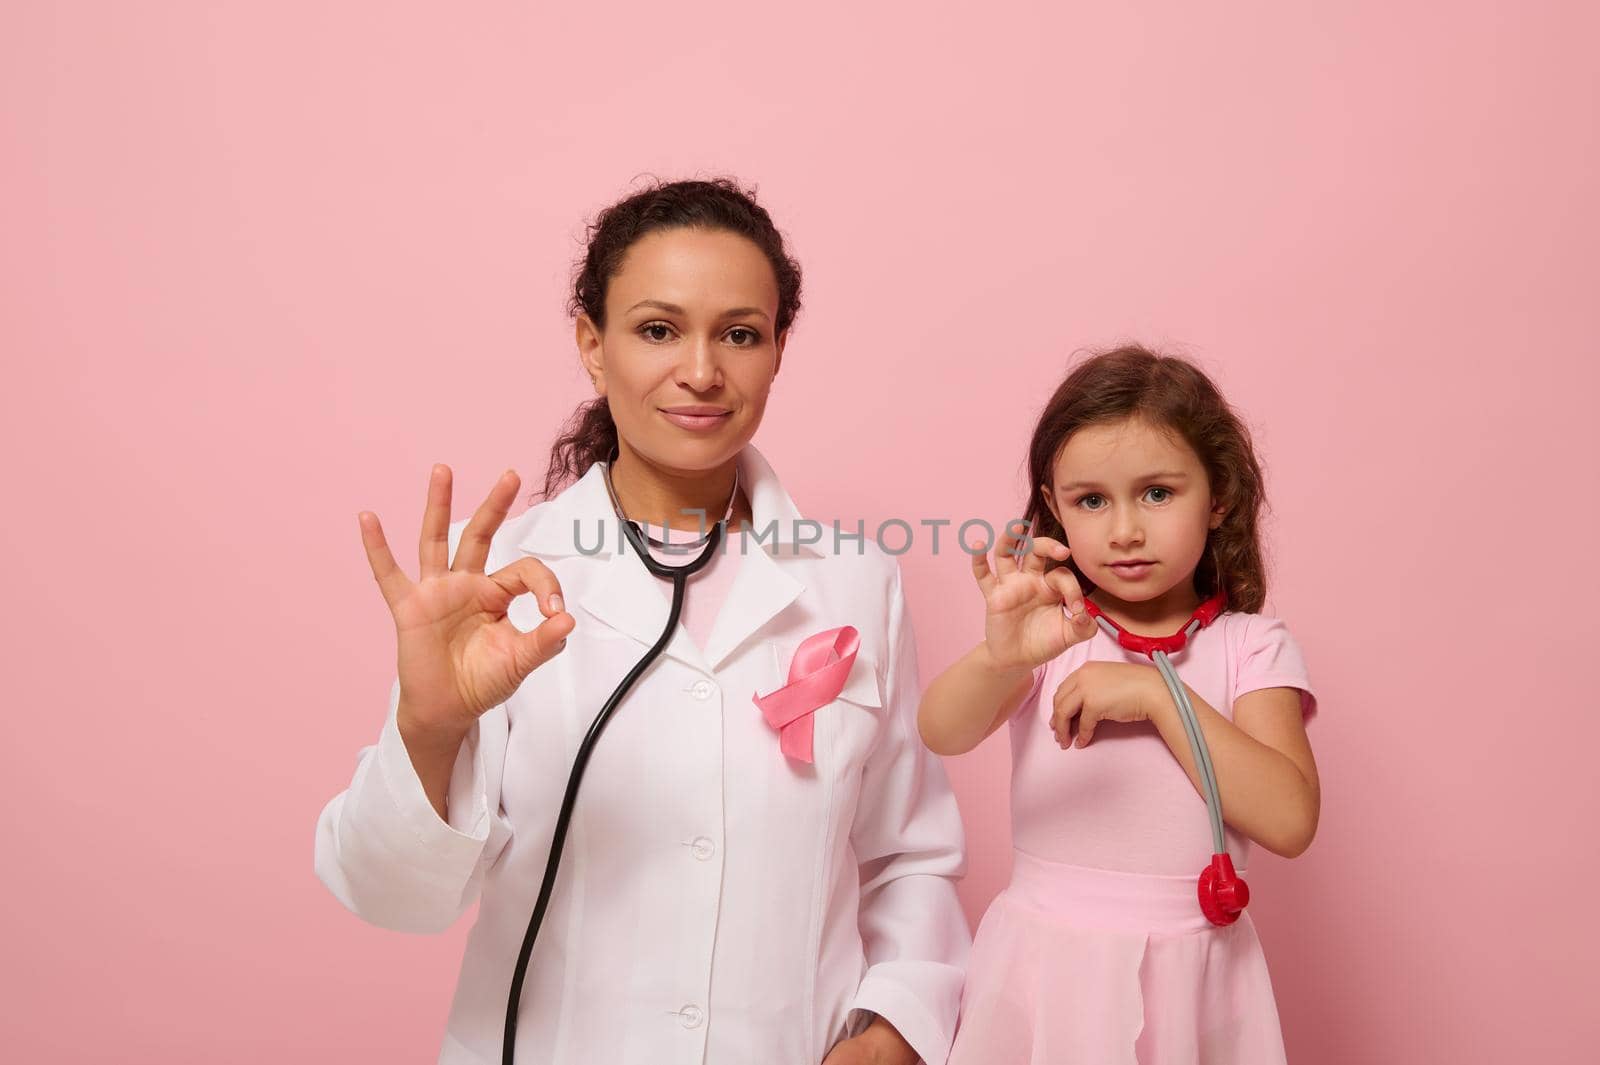 Pretty woman doctor in medical gown and a cute little girl, both with pink ribbon and phonendoscope around their neck, gesticulate with an OK sign to support breast cancer patients and survivors. by artgf